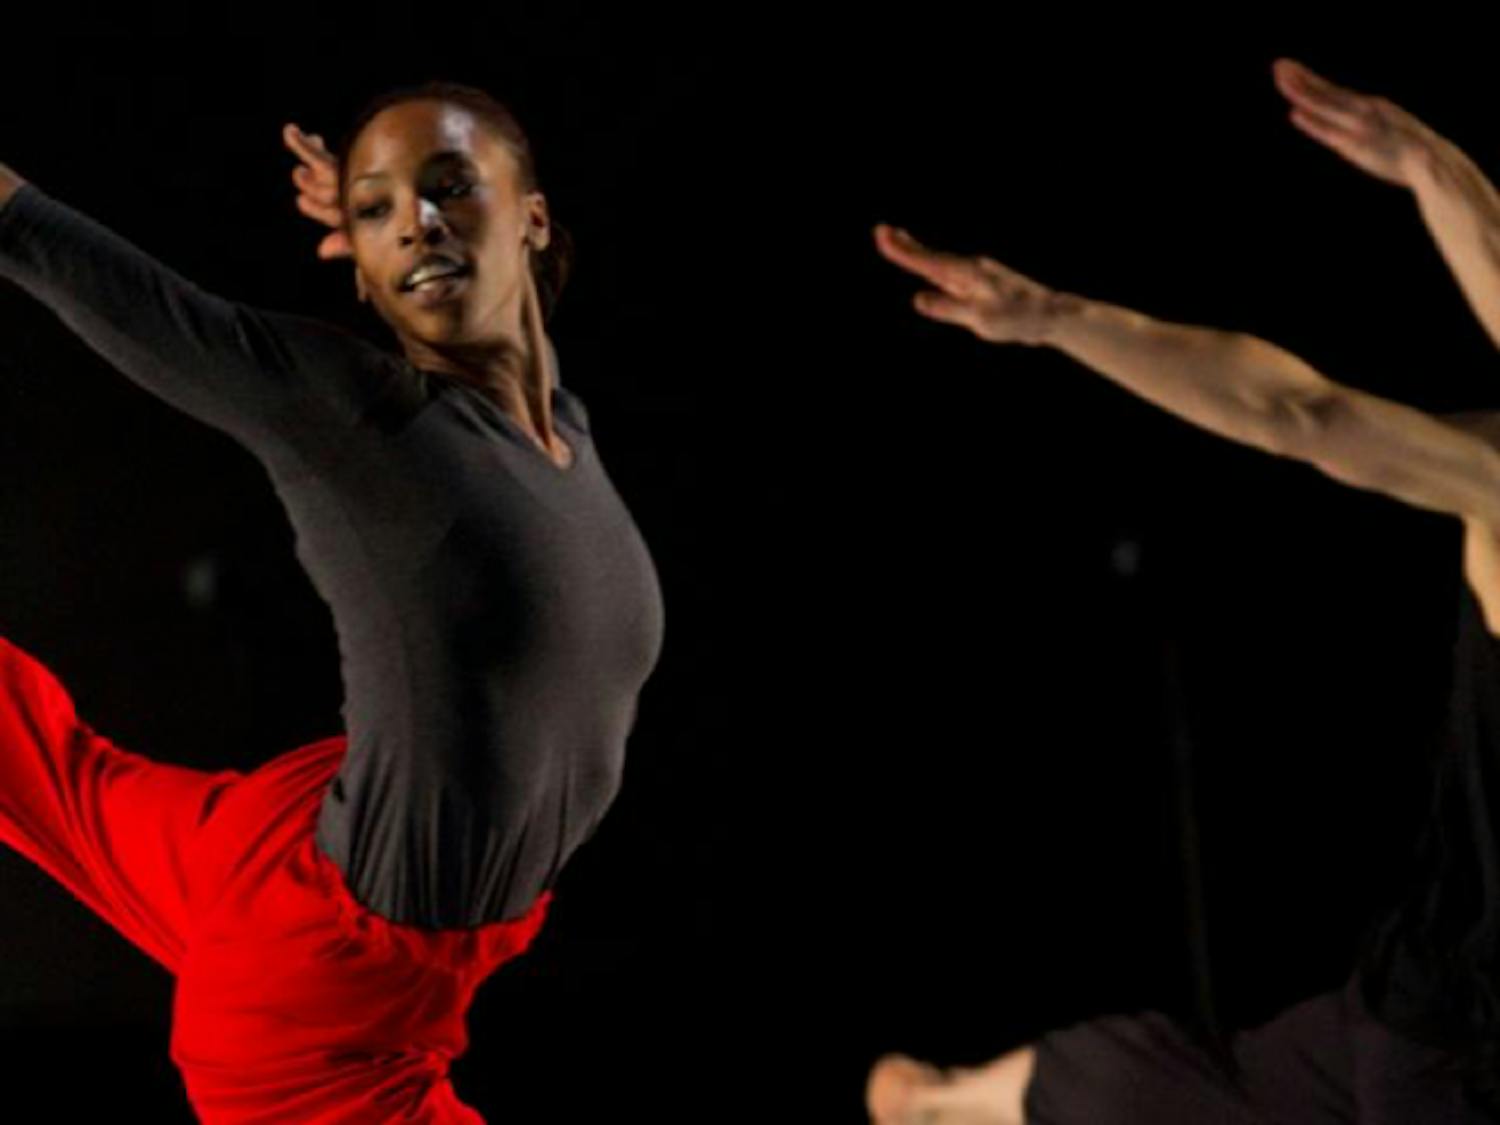 New York City based dancer Shayla-Vie Jenkins will be on campus as an artist in resident from Sept. 13-22.